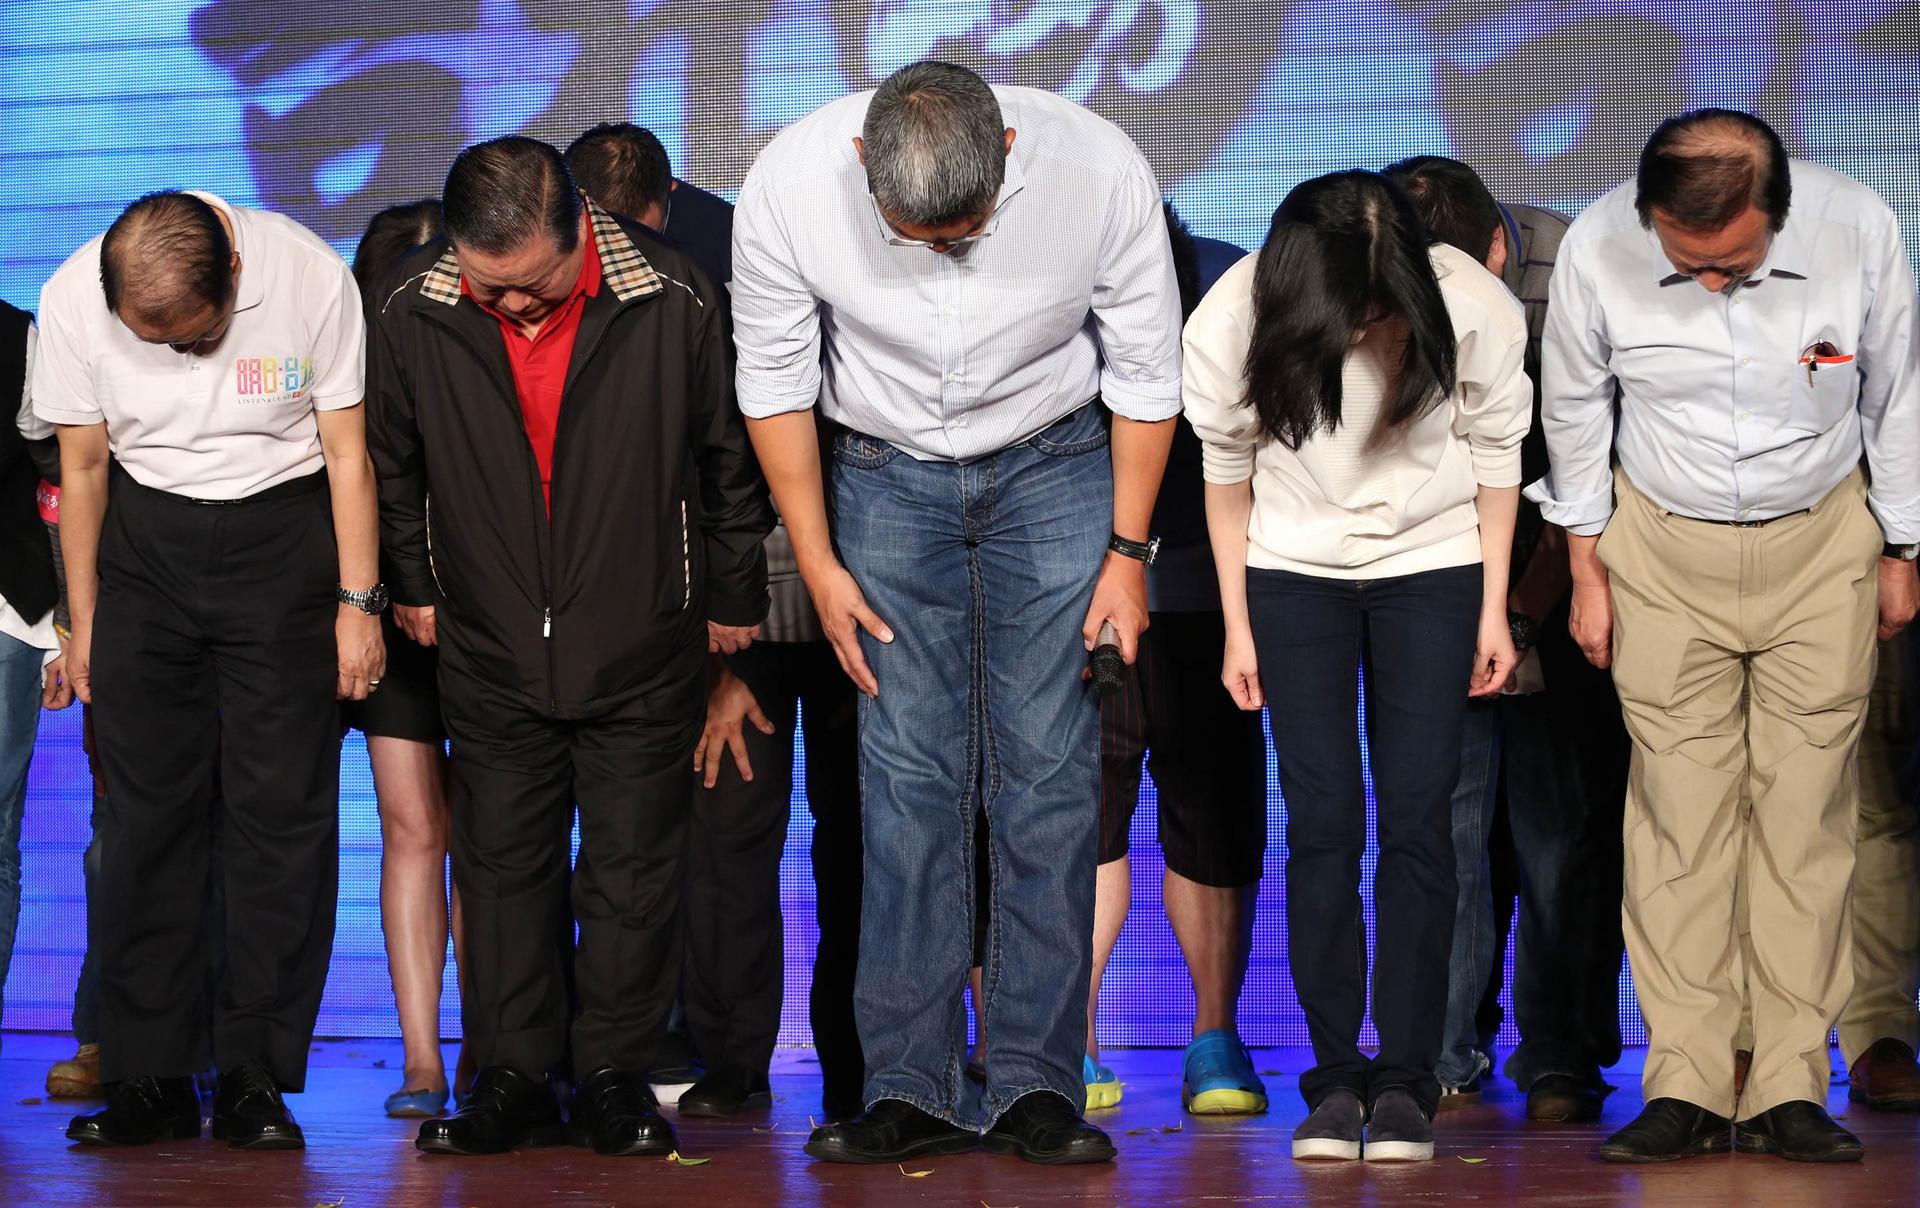 The KMT's Taipei candidate, Sean Lien Sheng-wen, and supporters bow.